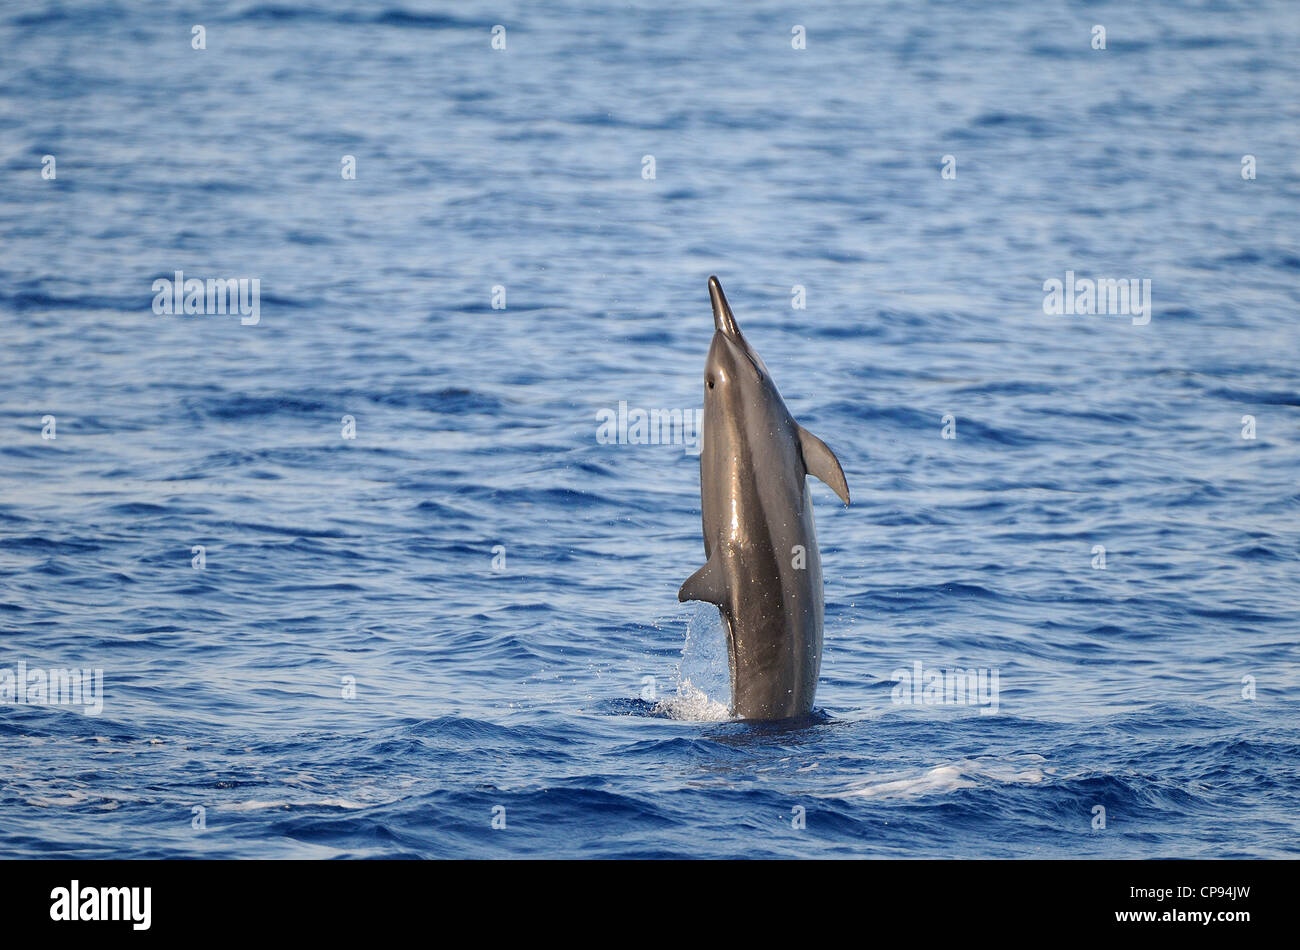 Spinner Dolphin (Stenella longirostris) leaping, The Maldives Stock Photo